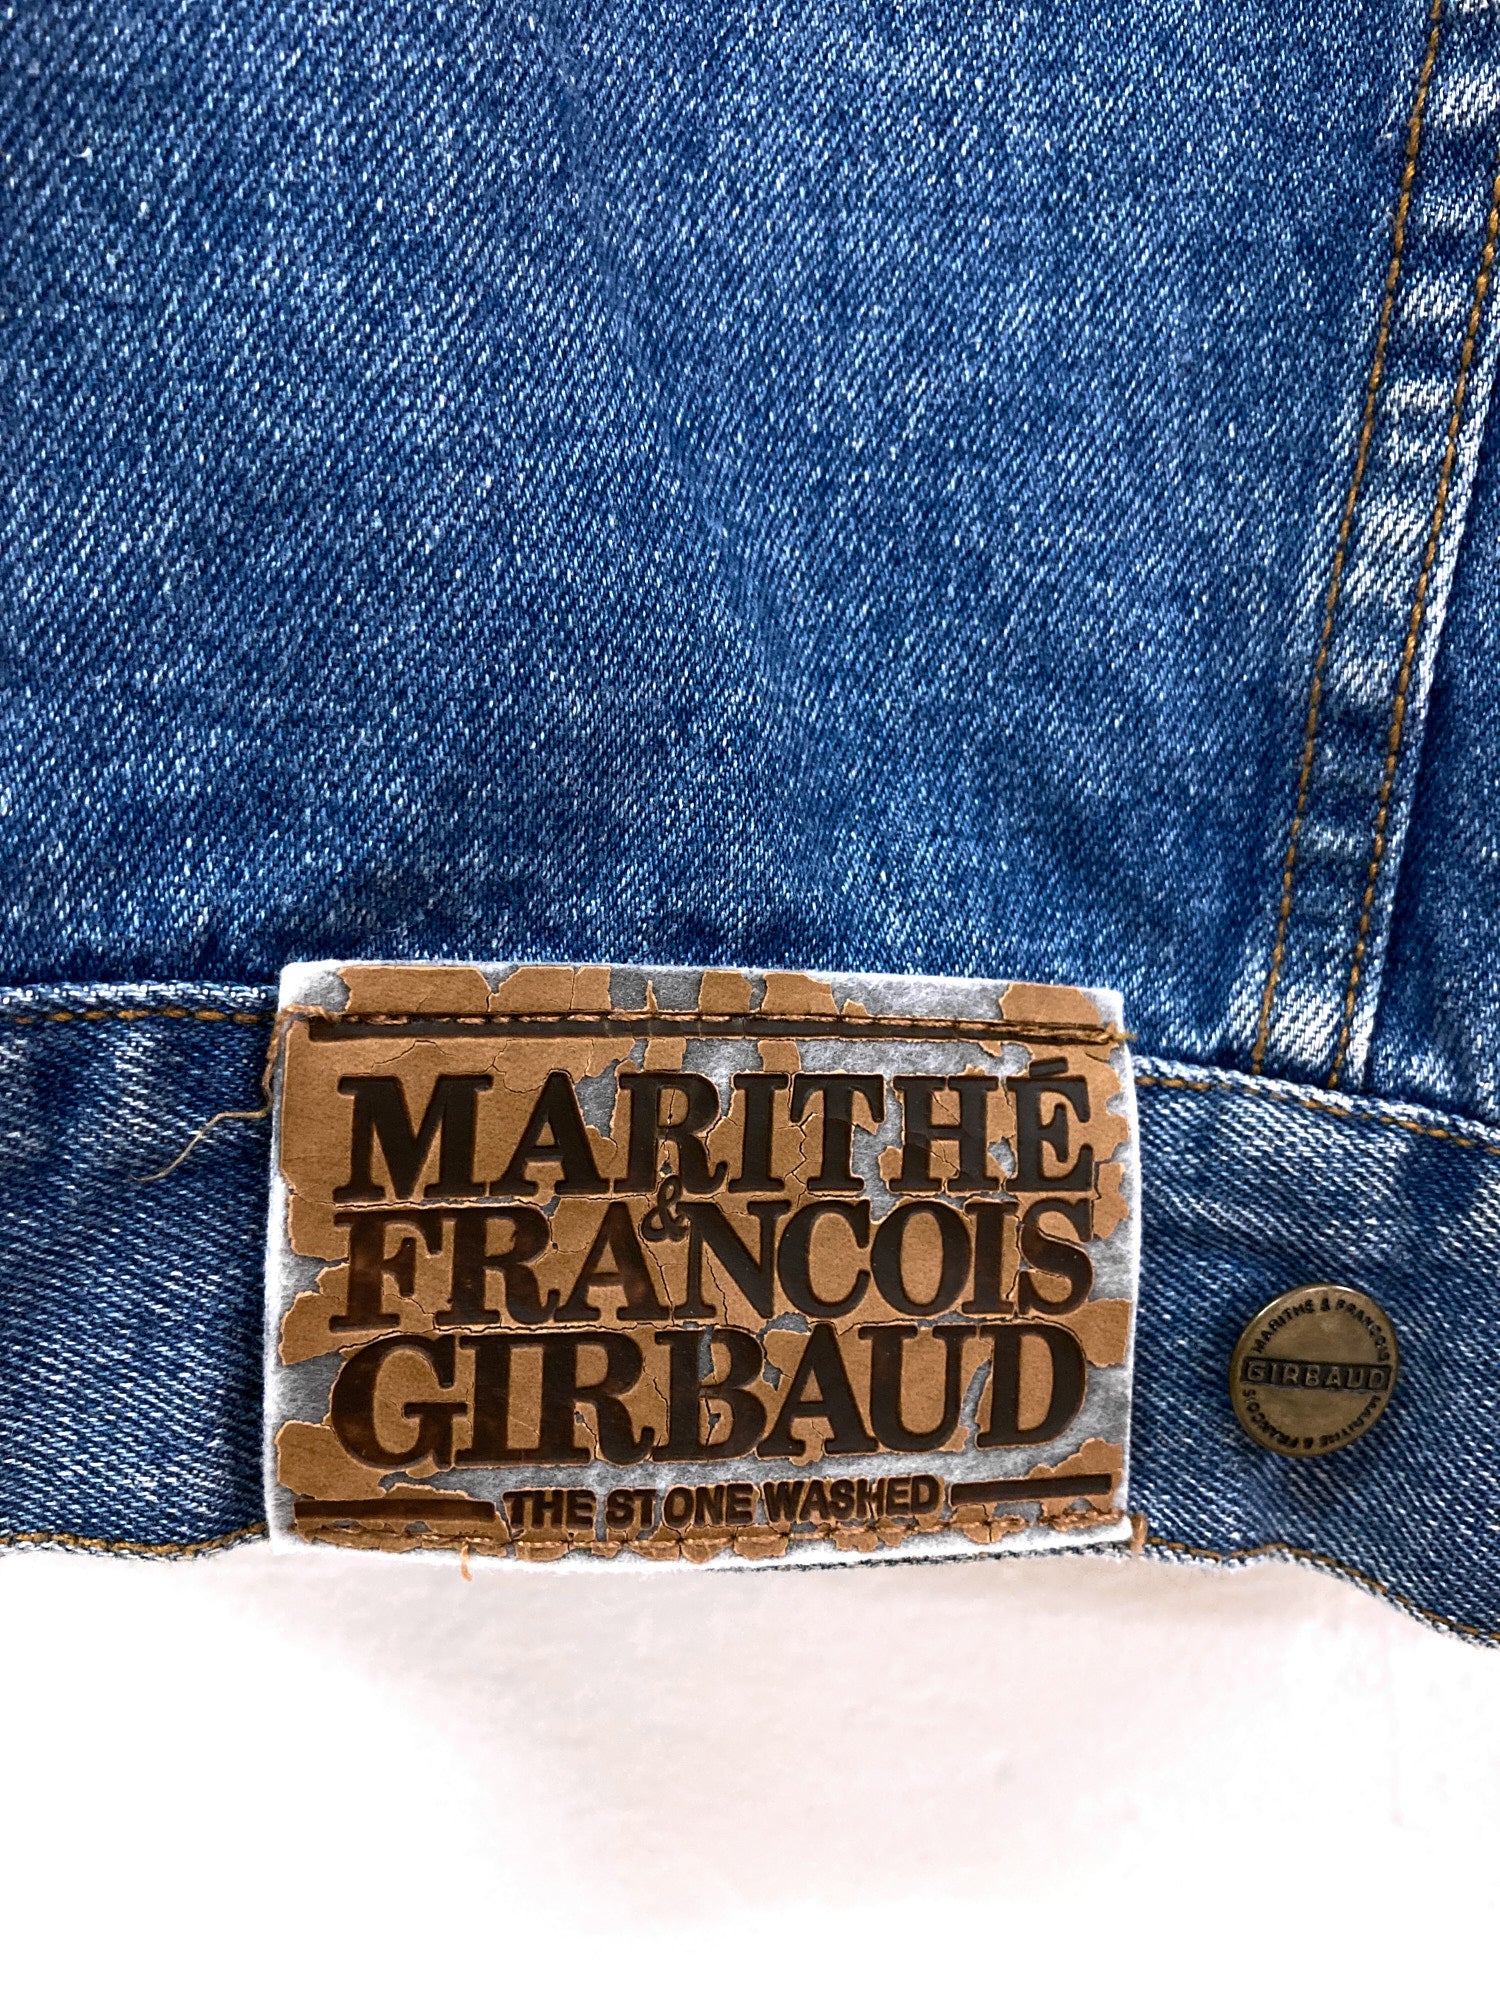 Marithe Francois Girbaud stonewashed denim jacket with crumbling brand patch - L